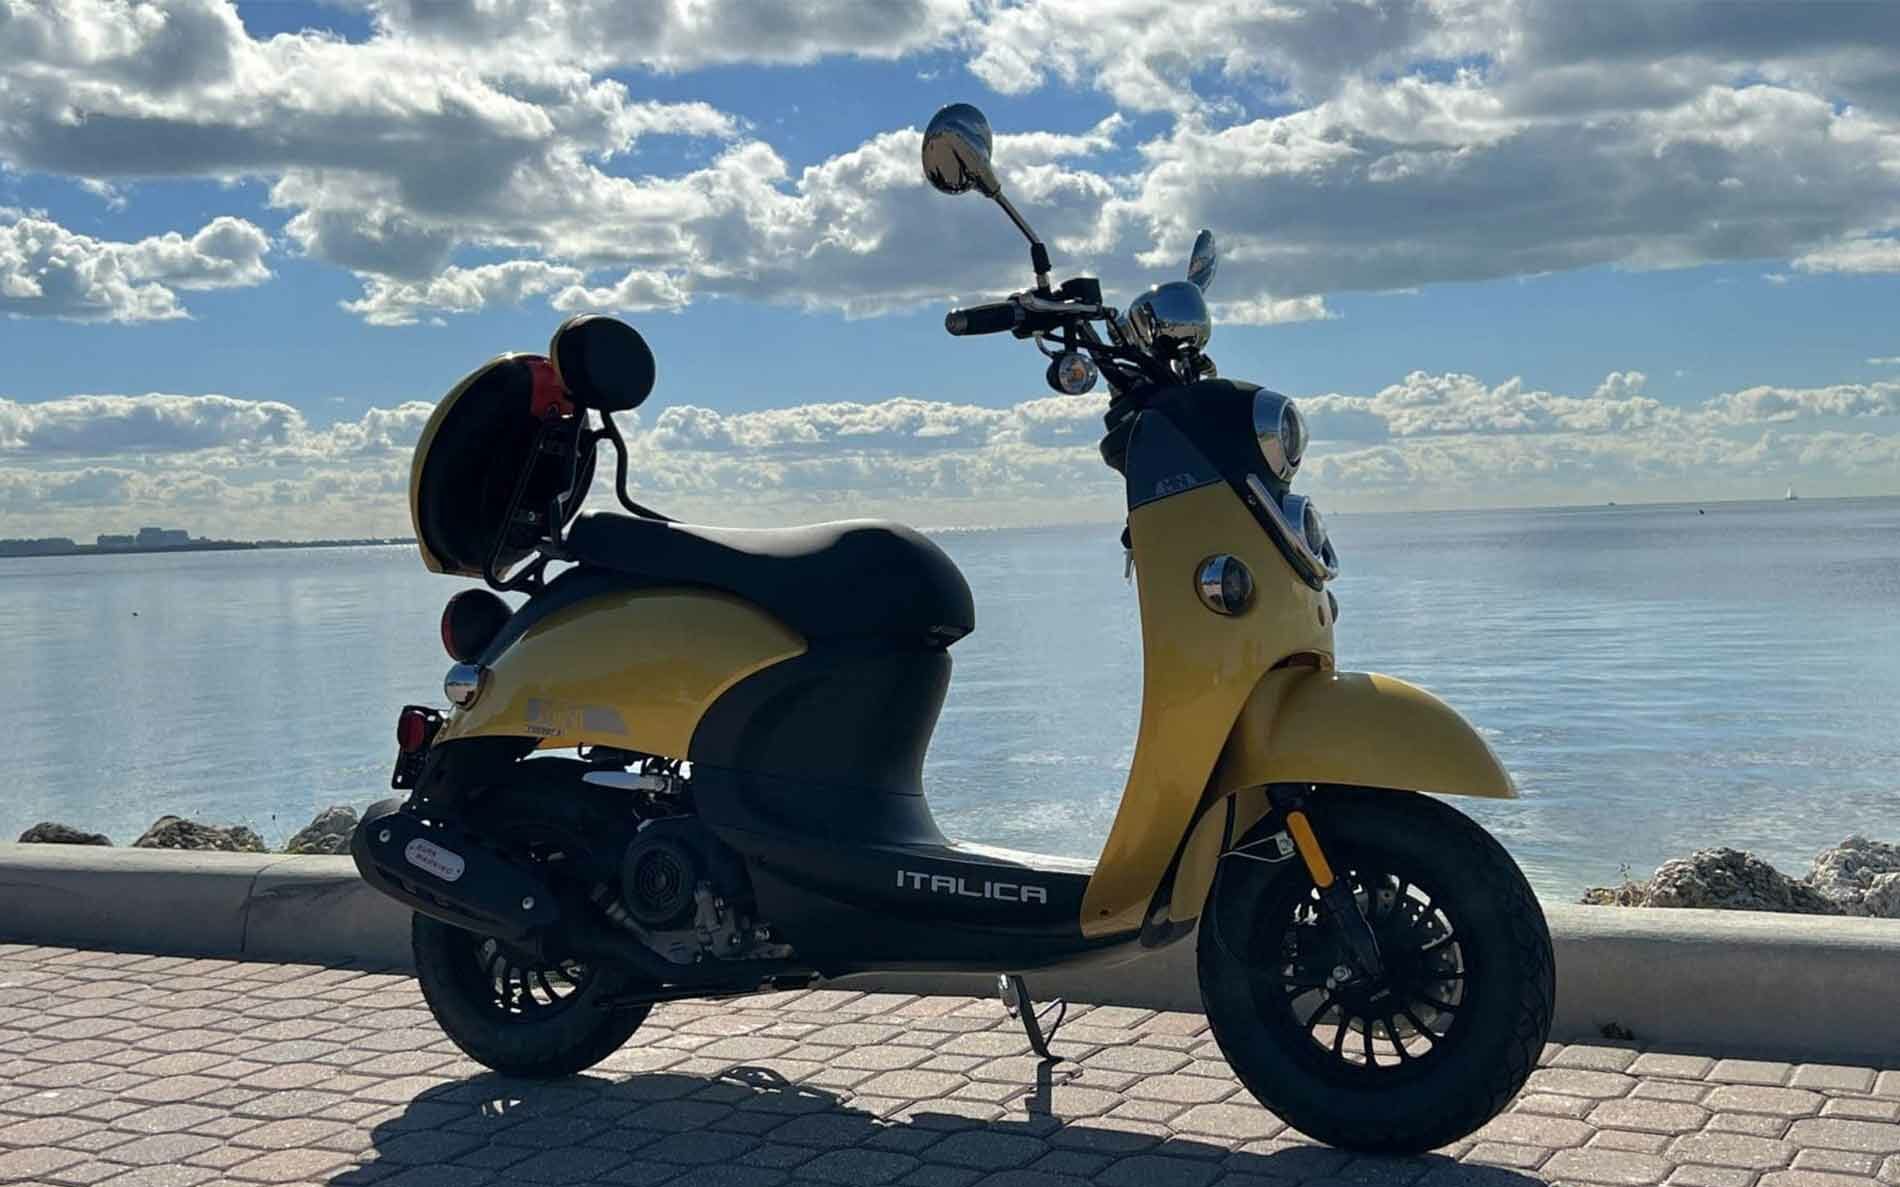 italica-mini-50cc-yellow-scooter-rental-front-right